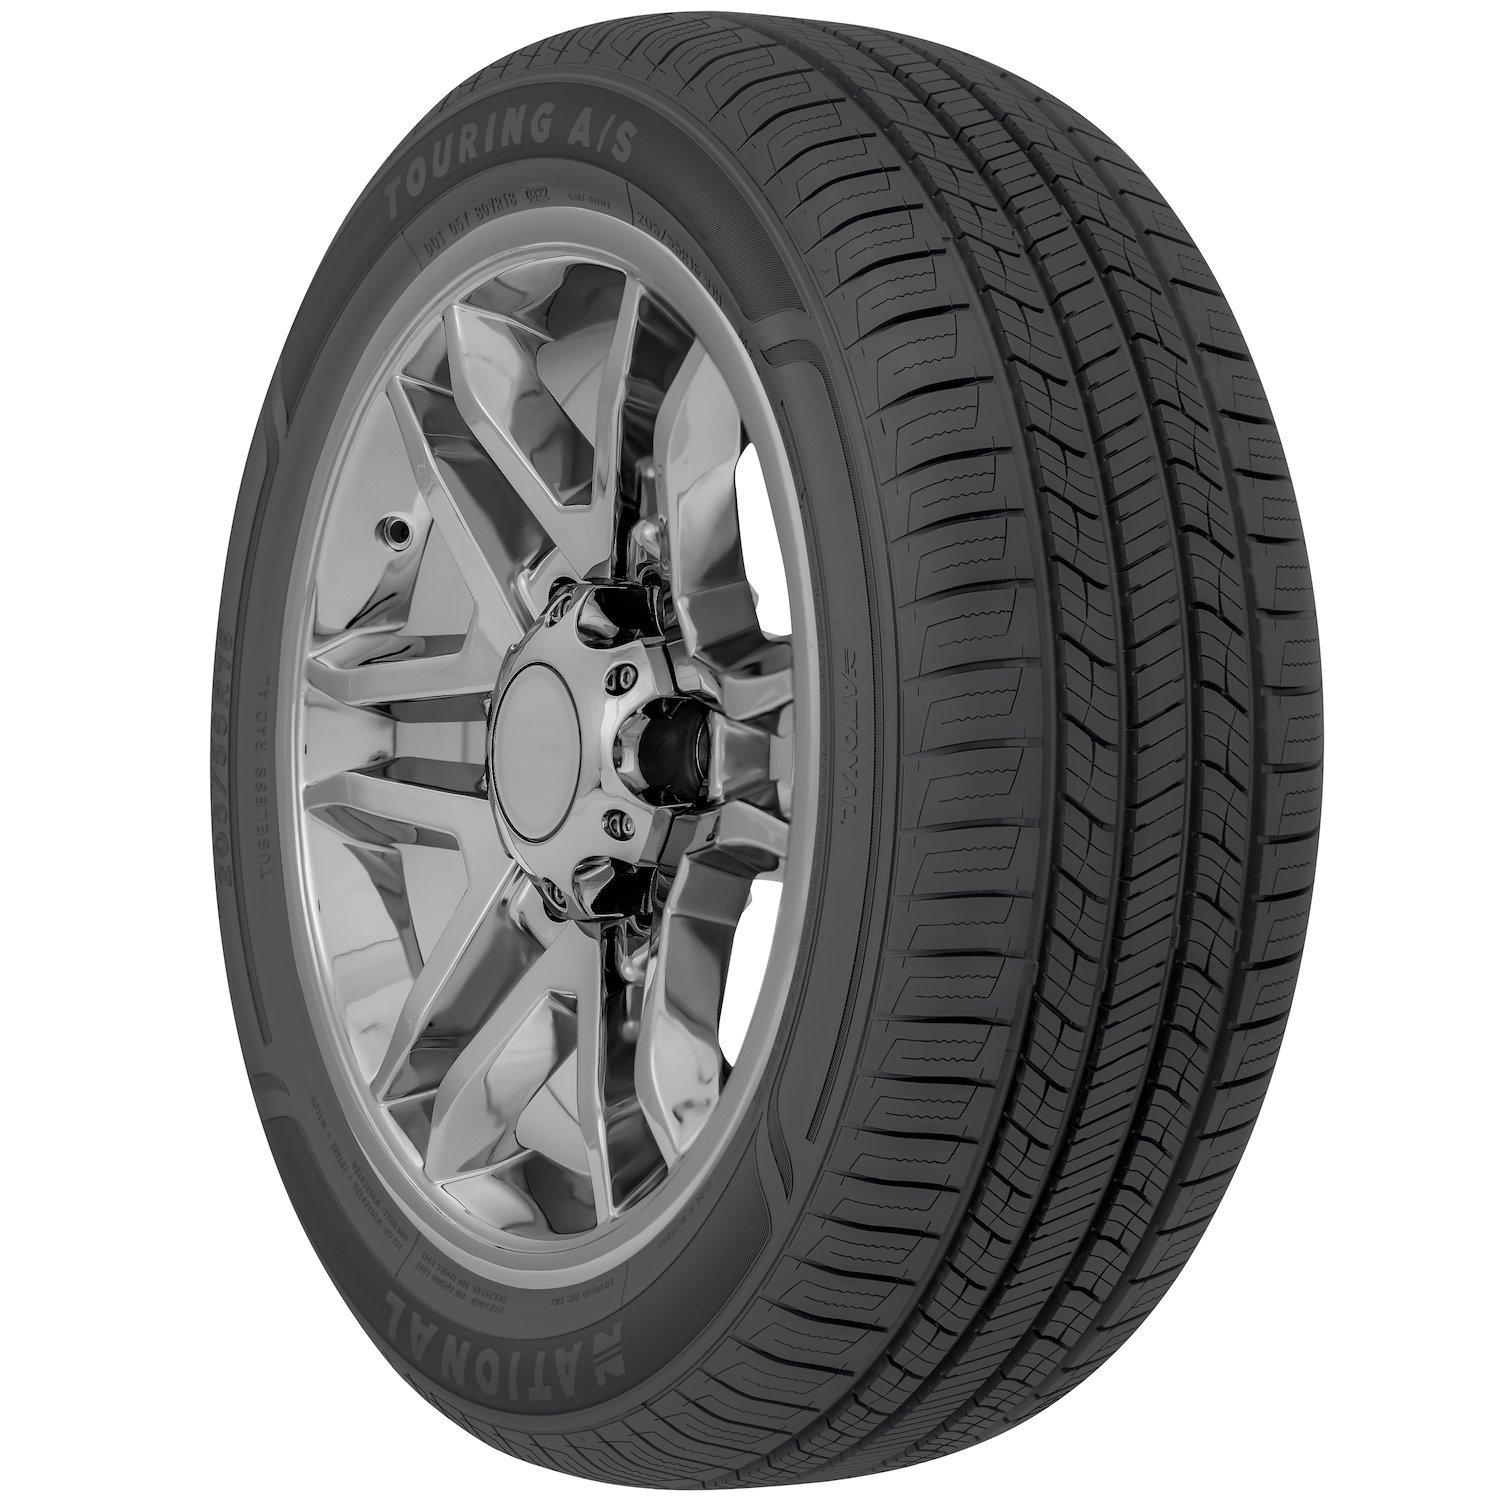 NLR27 Touring A/S Tire, 185/65R15